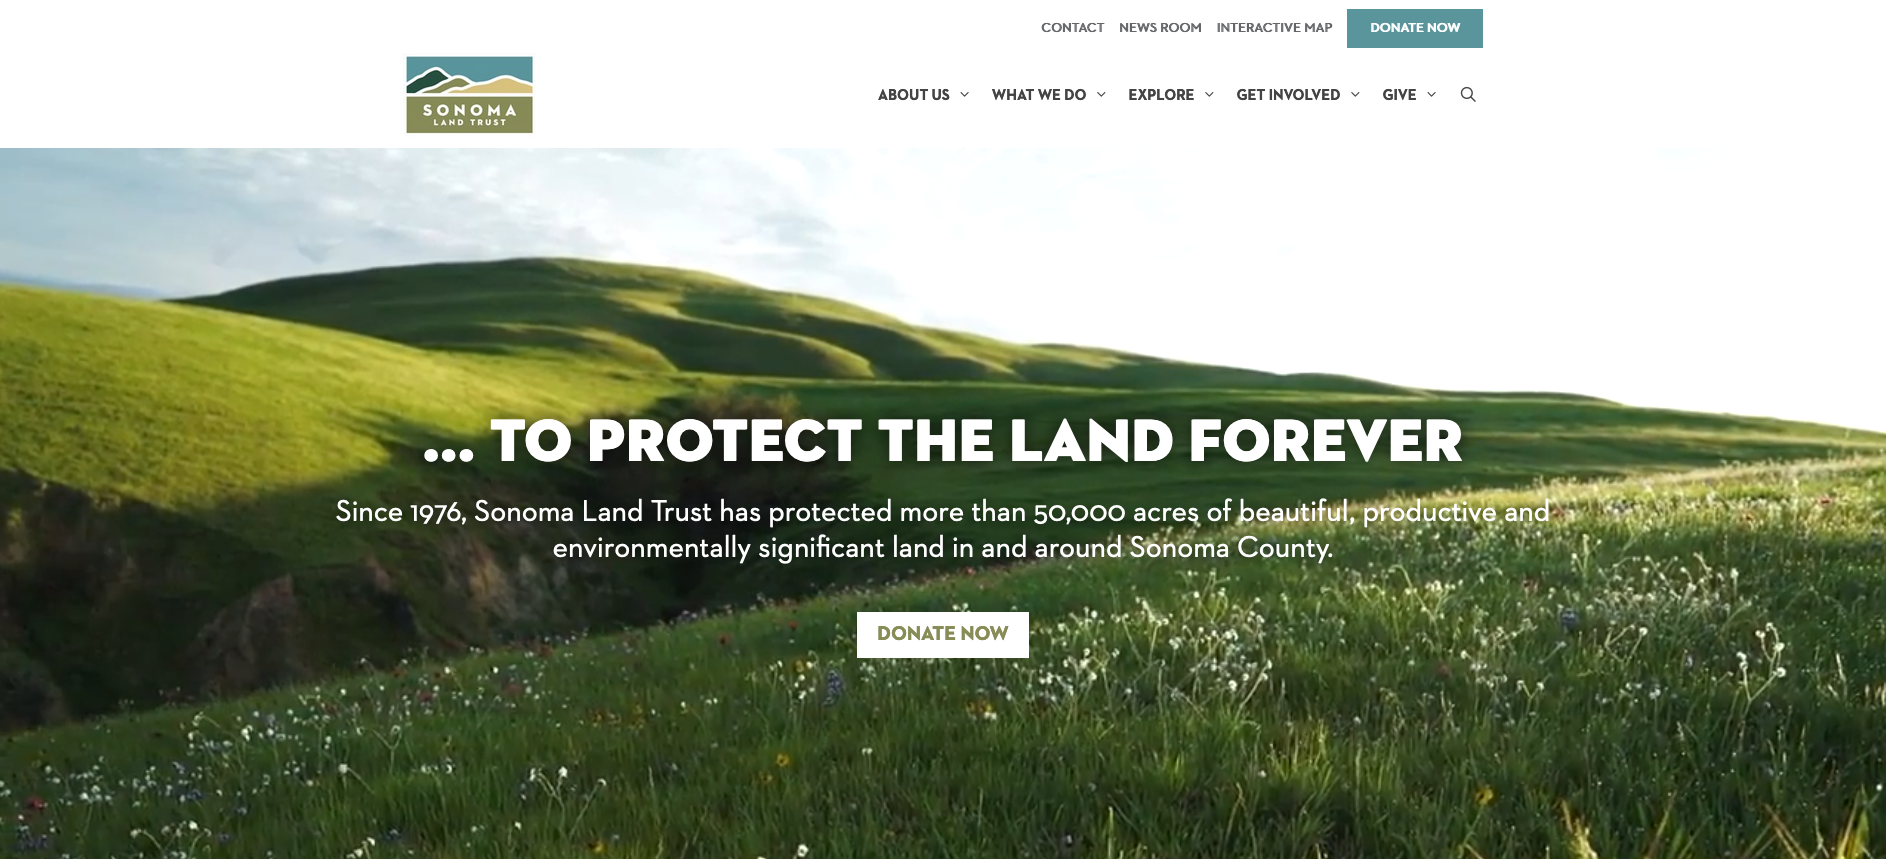 Sonoma Land Trust Home Page